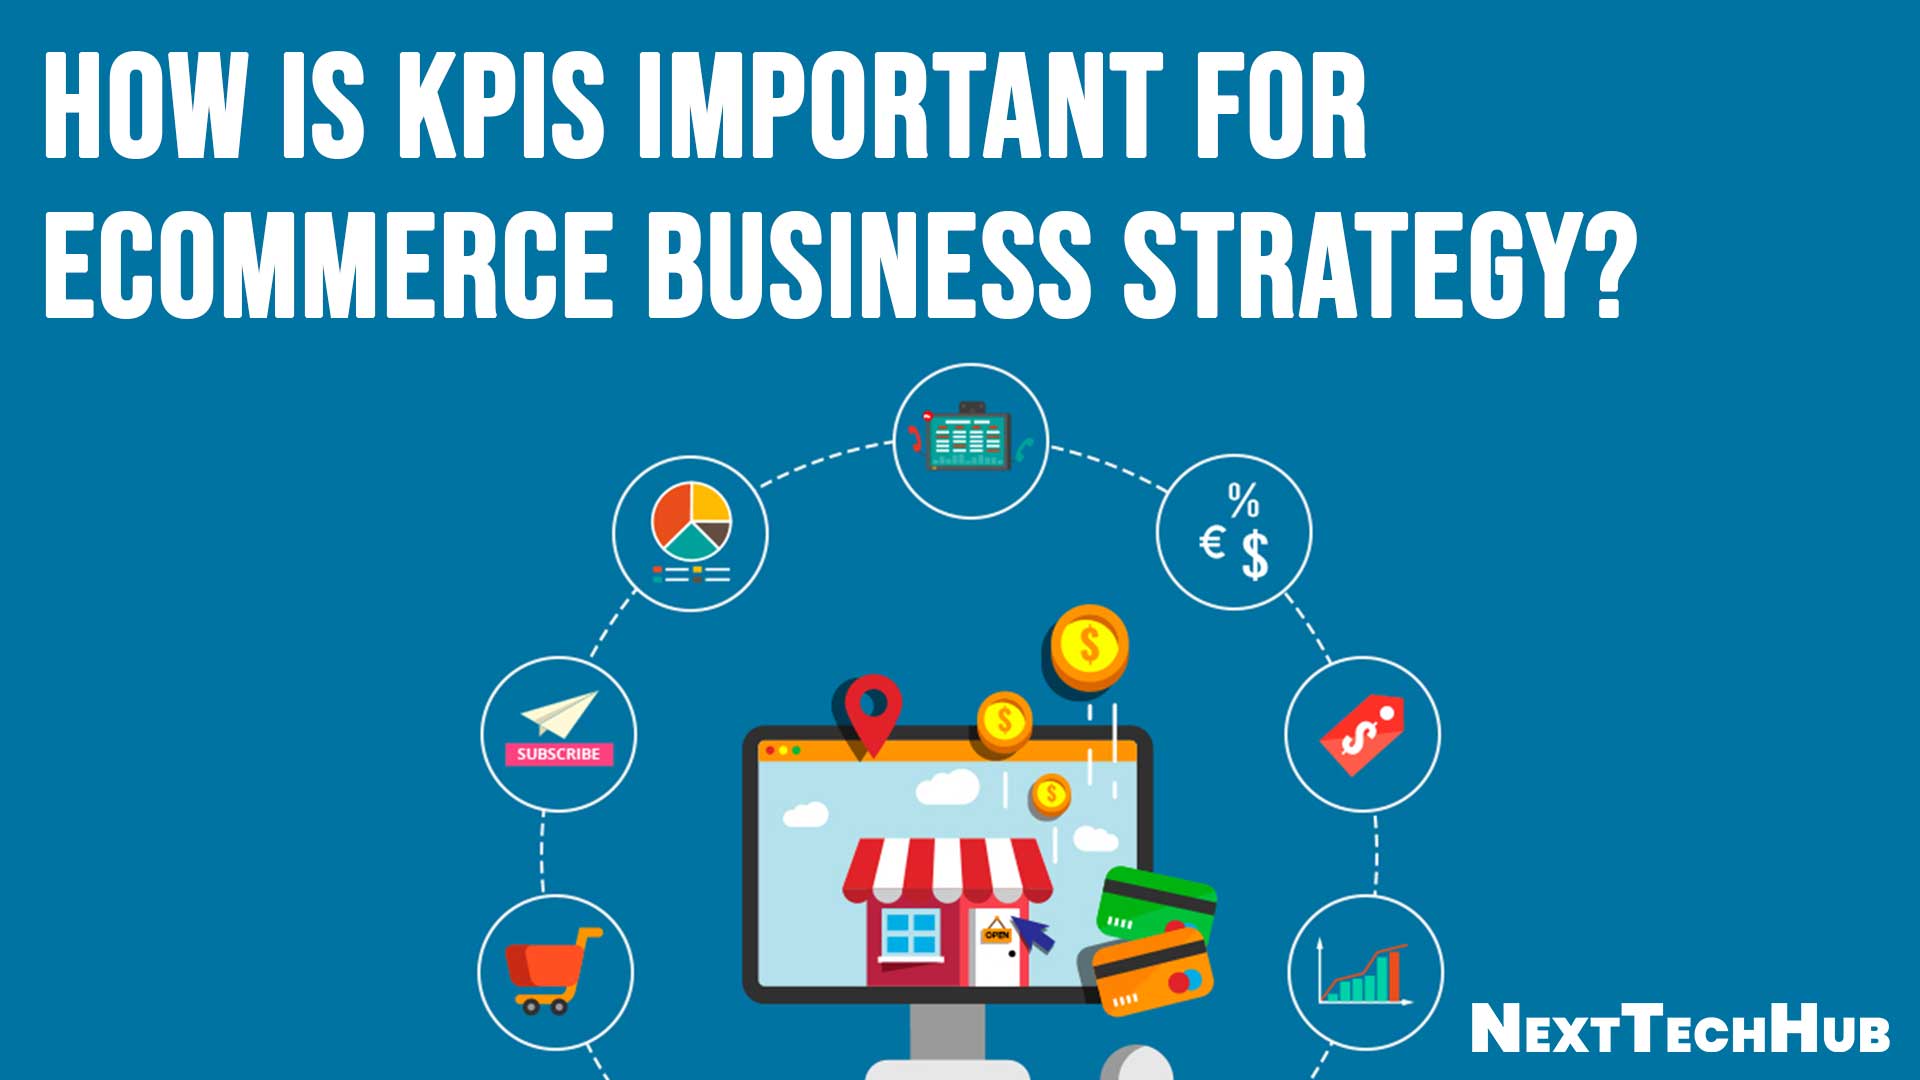 How is KPIs Important for eCommerce Business Strategy